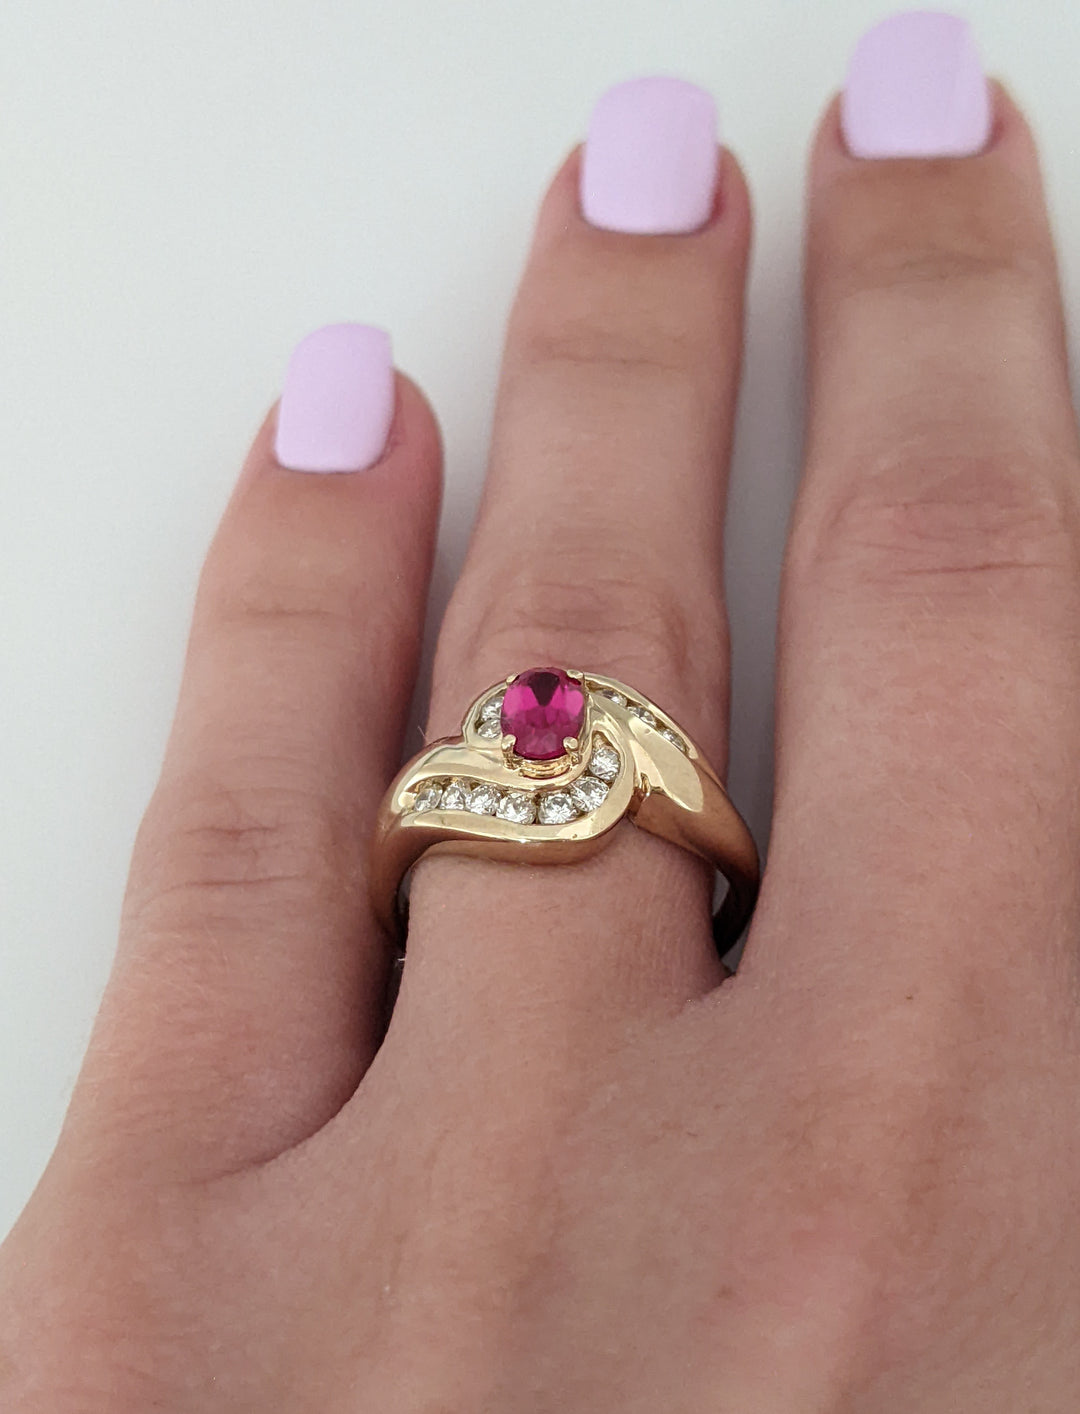 14K RUBY OVAL 4X6 WITH/.28DTW BYPASS ESTATE RING 4.3 GRAMS